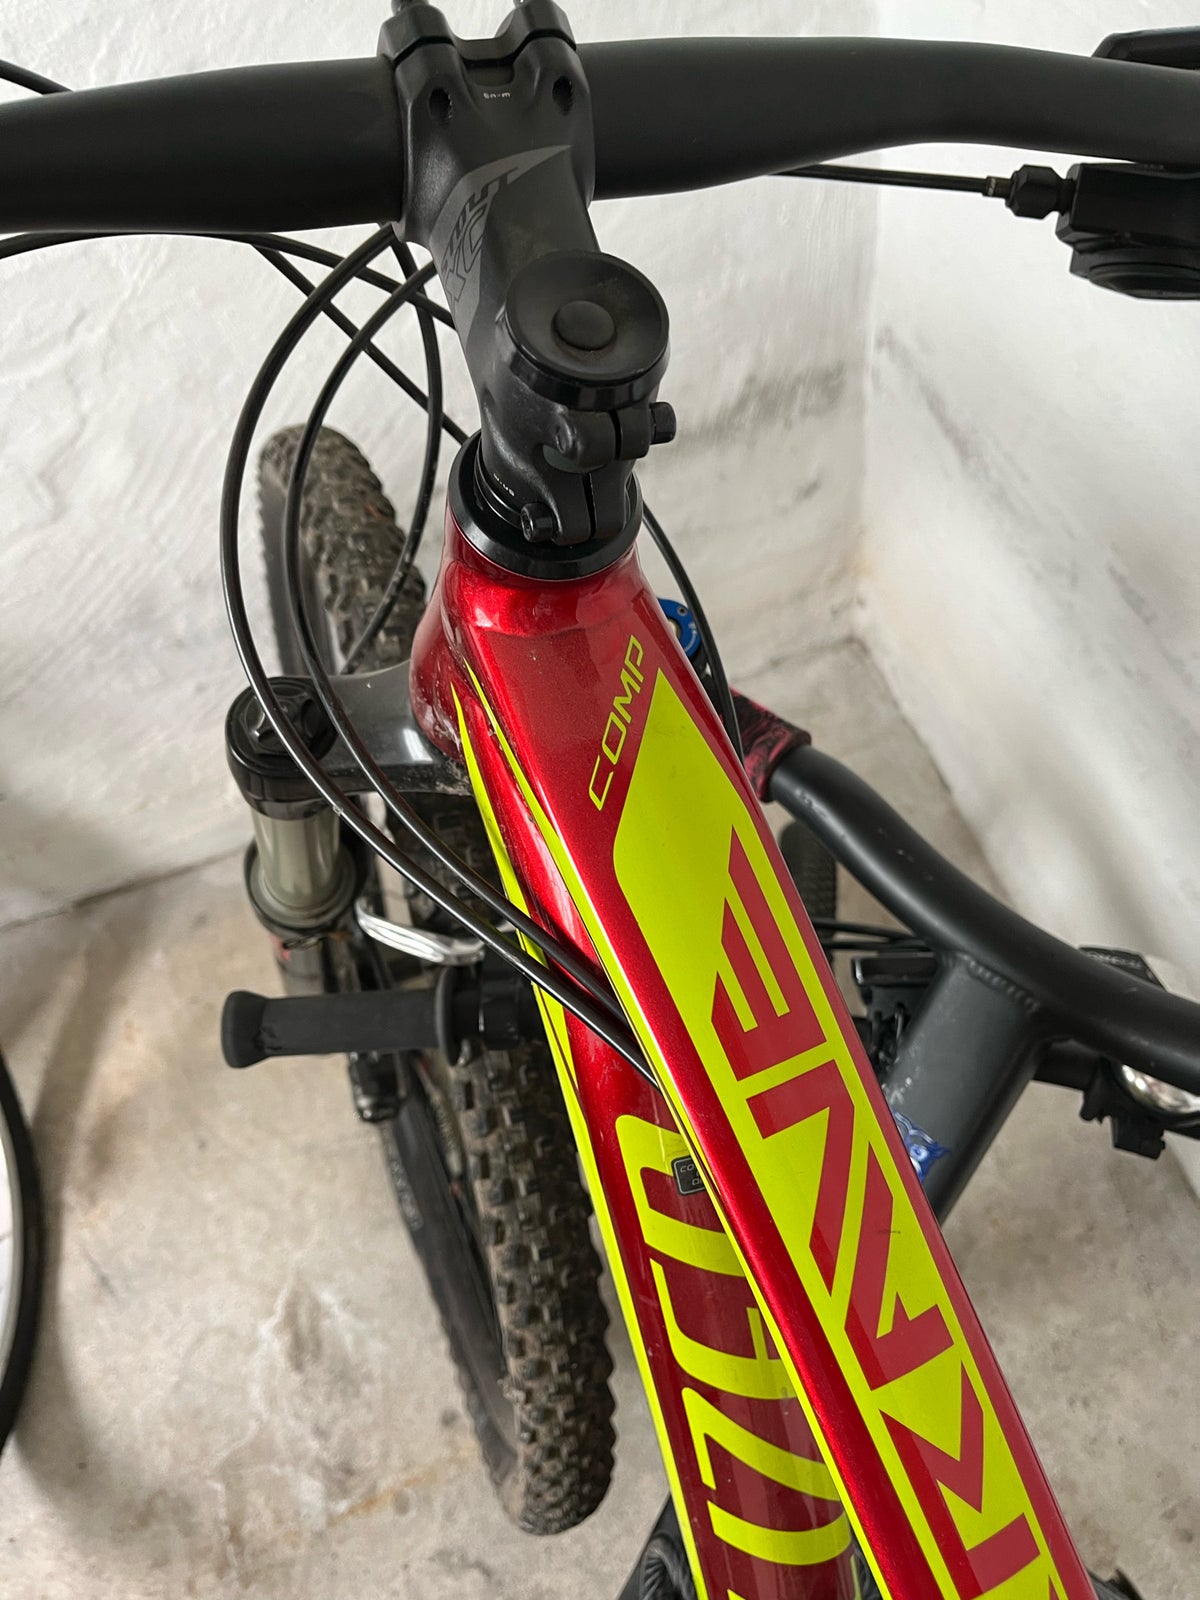 Specialized Comp Crave, hardtail, 17,5 tommer